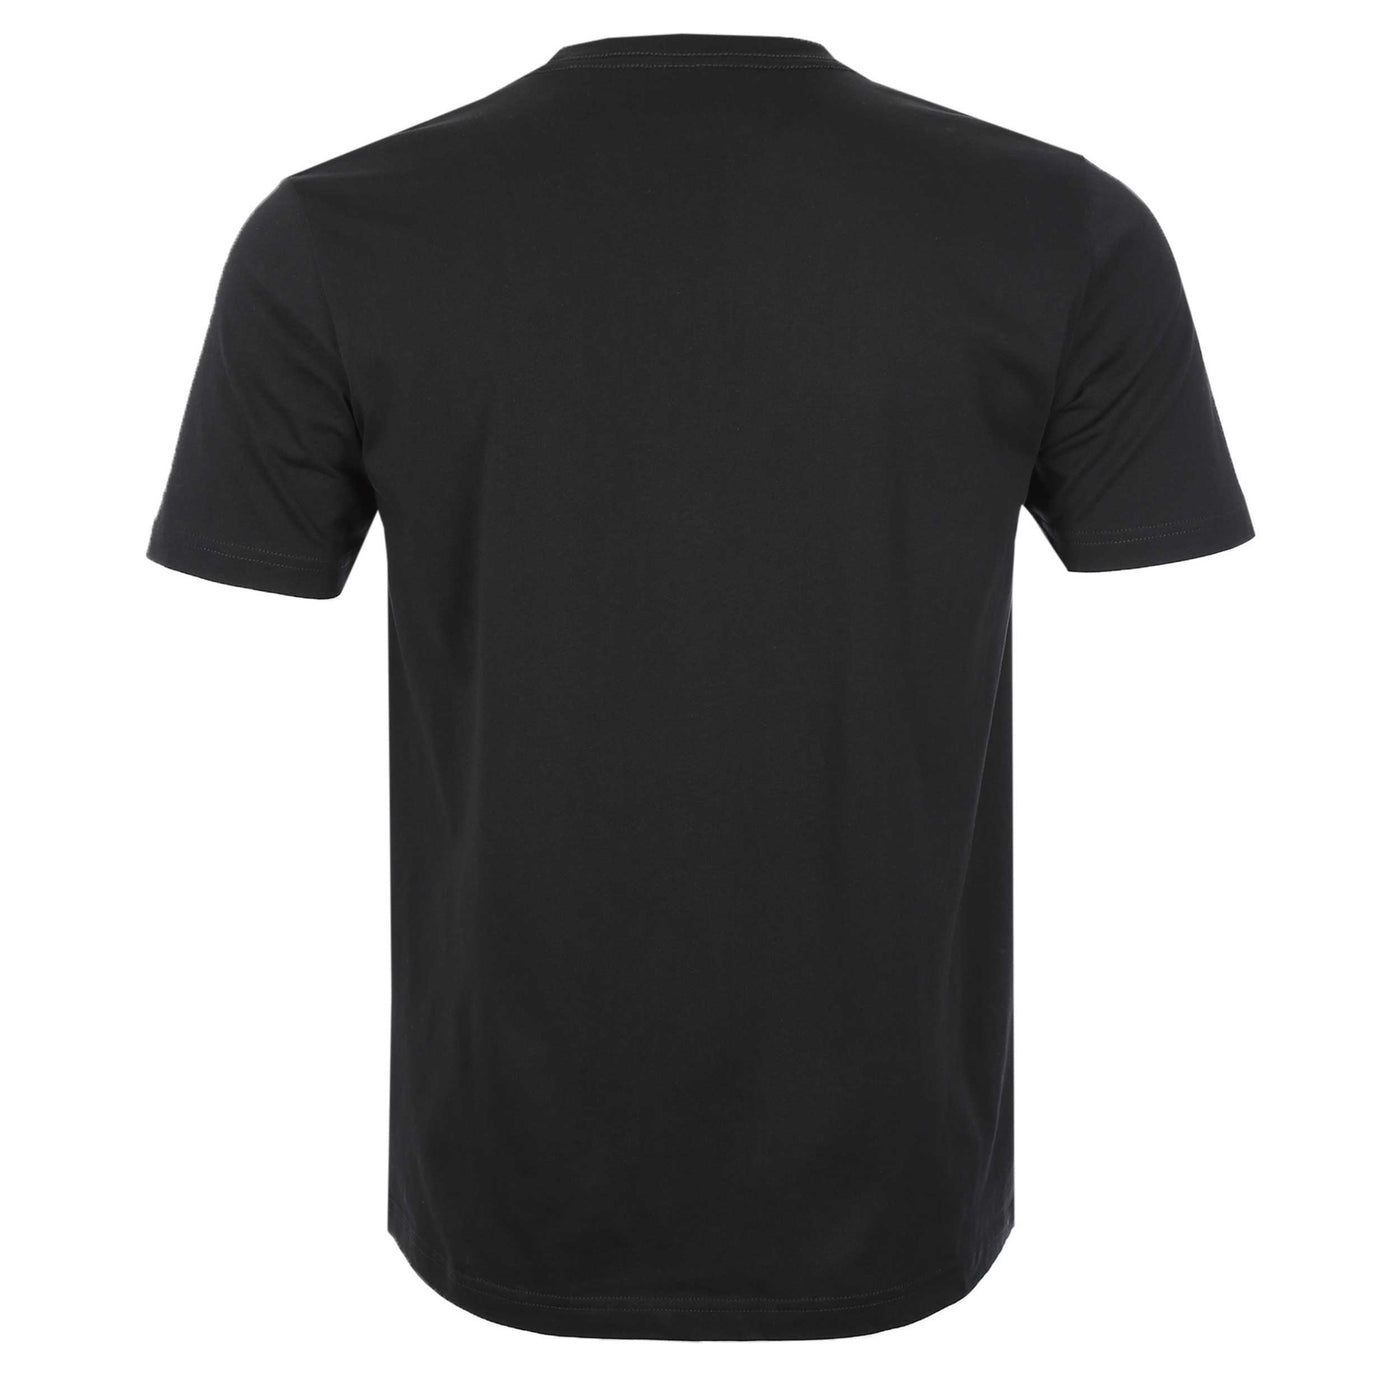 Paul Smith Cyclist T Shirt in Black Back